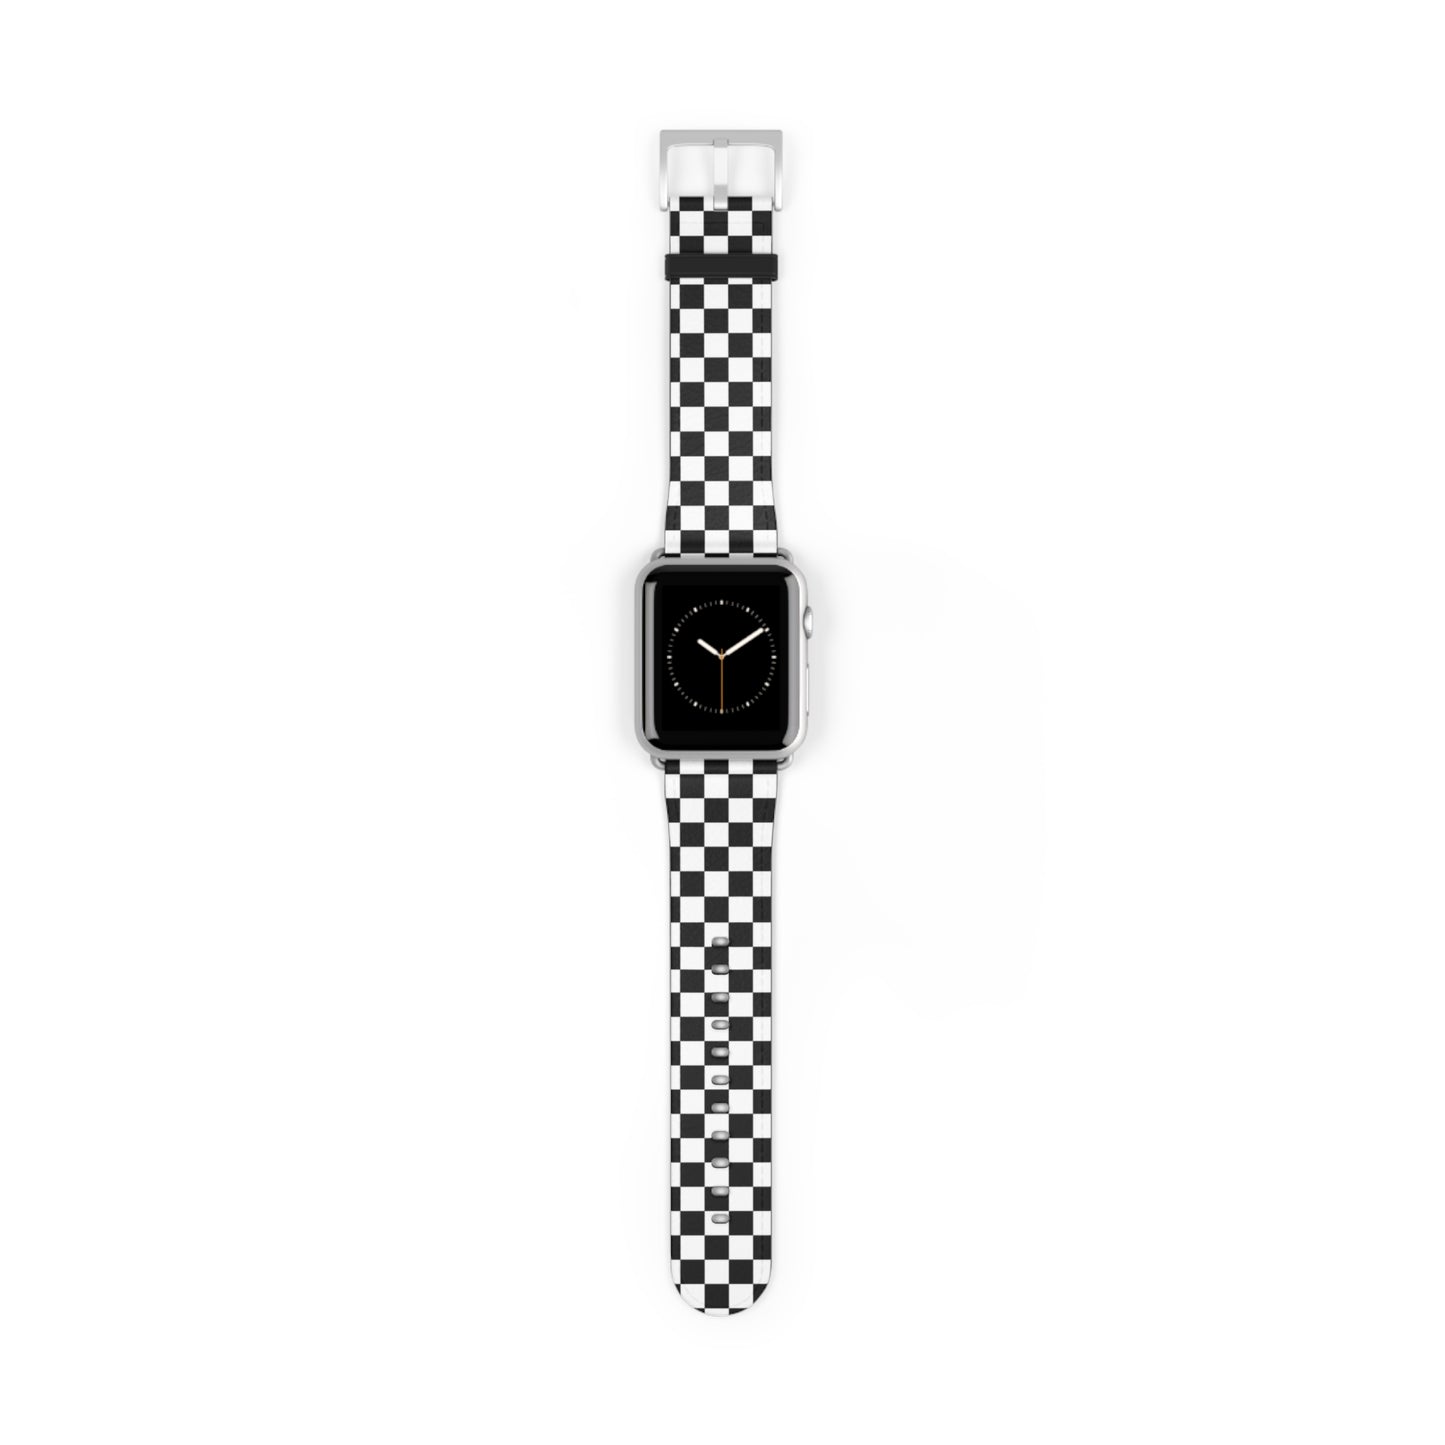 Checkmate Apple Watch Band